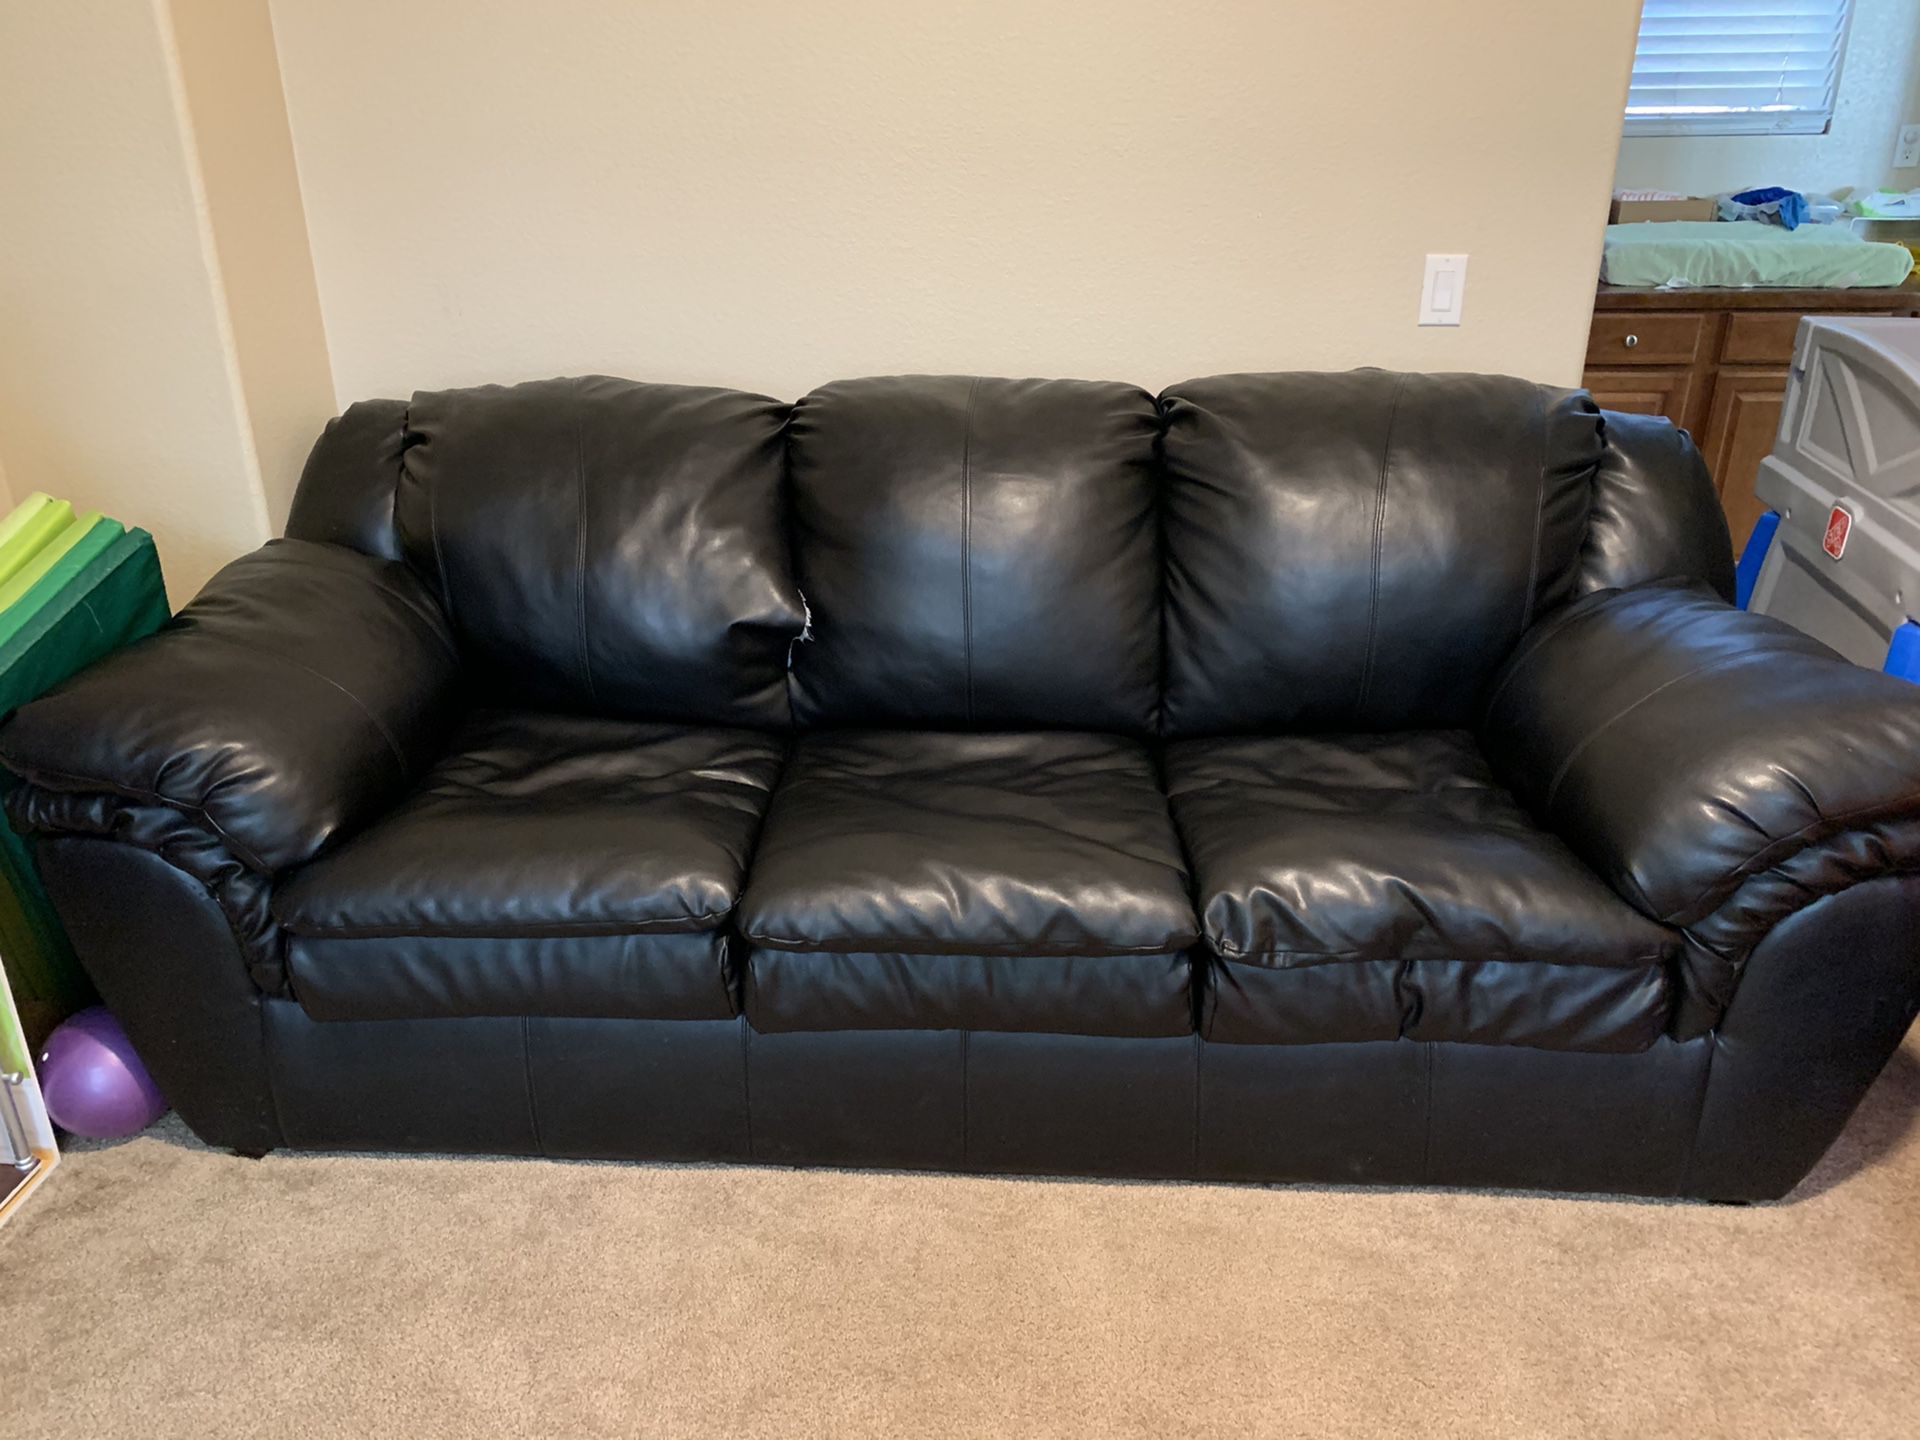 Black pleather couch, average size tear in middle upper cushion otherwise great condition